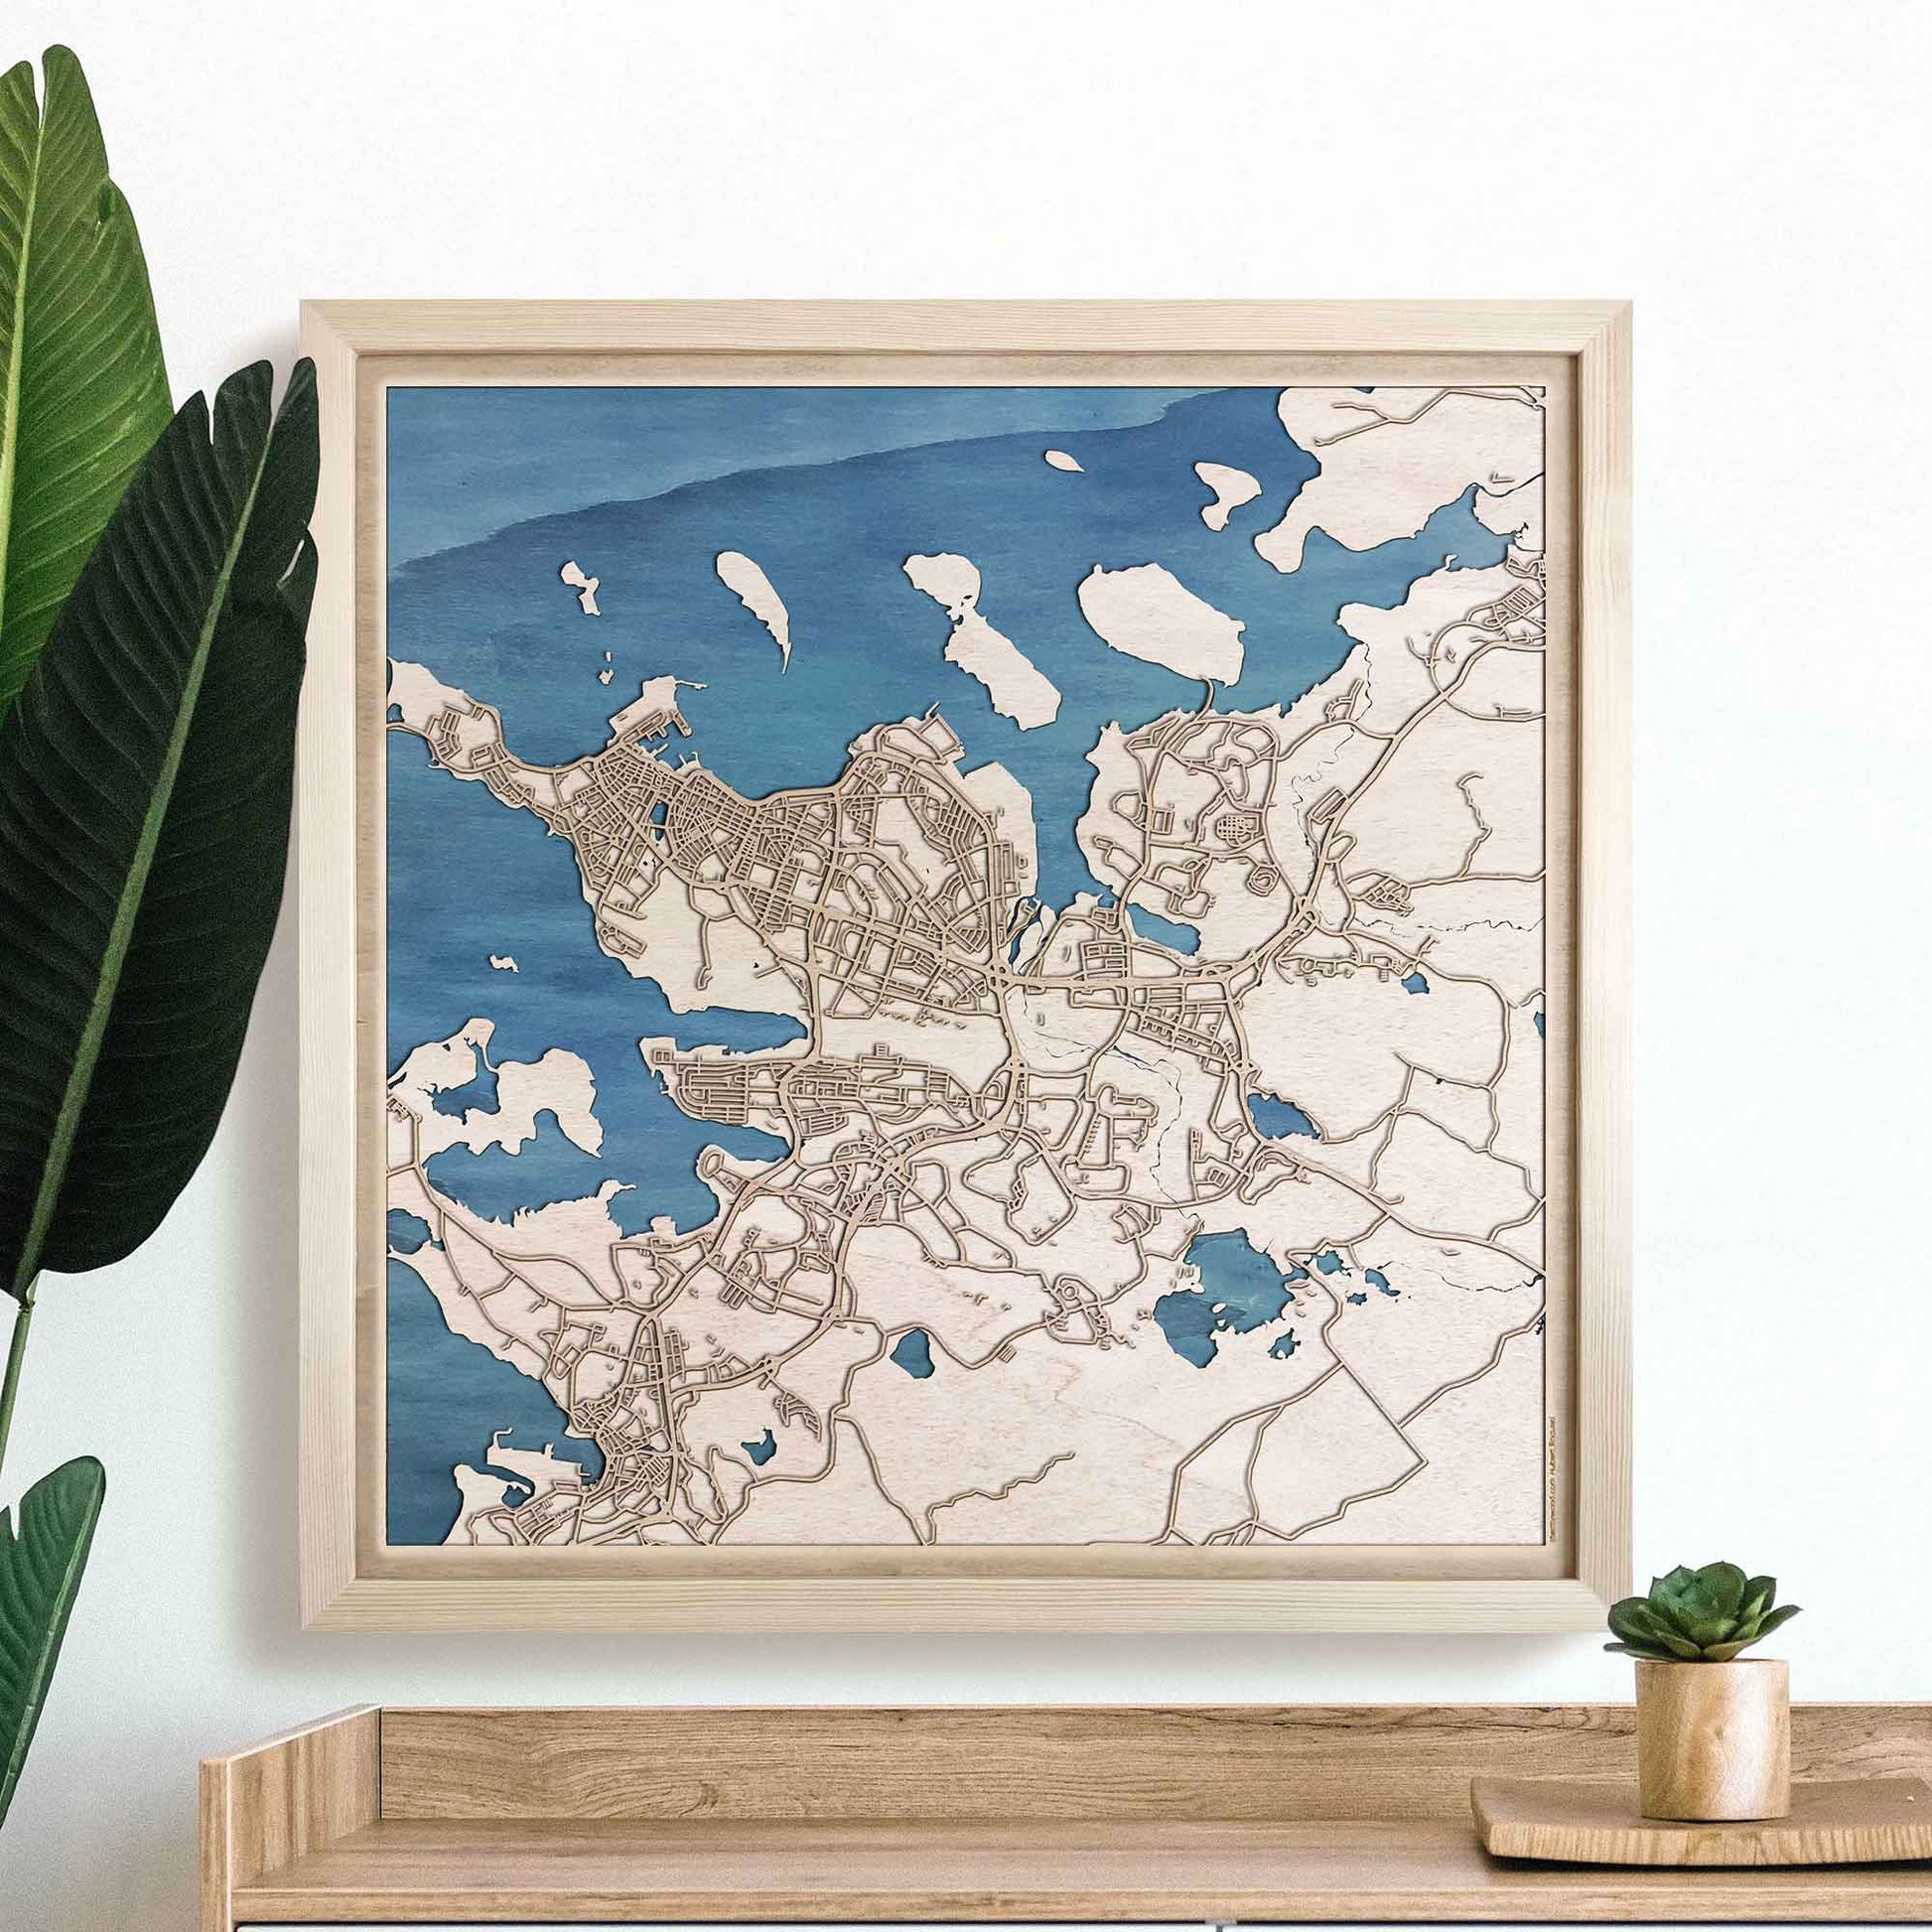 Reykjavik Wooden Map by CityWood - Custom Wood Map Art - Unique Laser Cut Engraved - Anniversary Gift